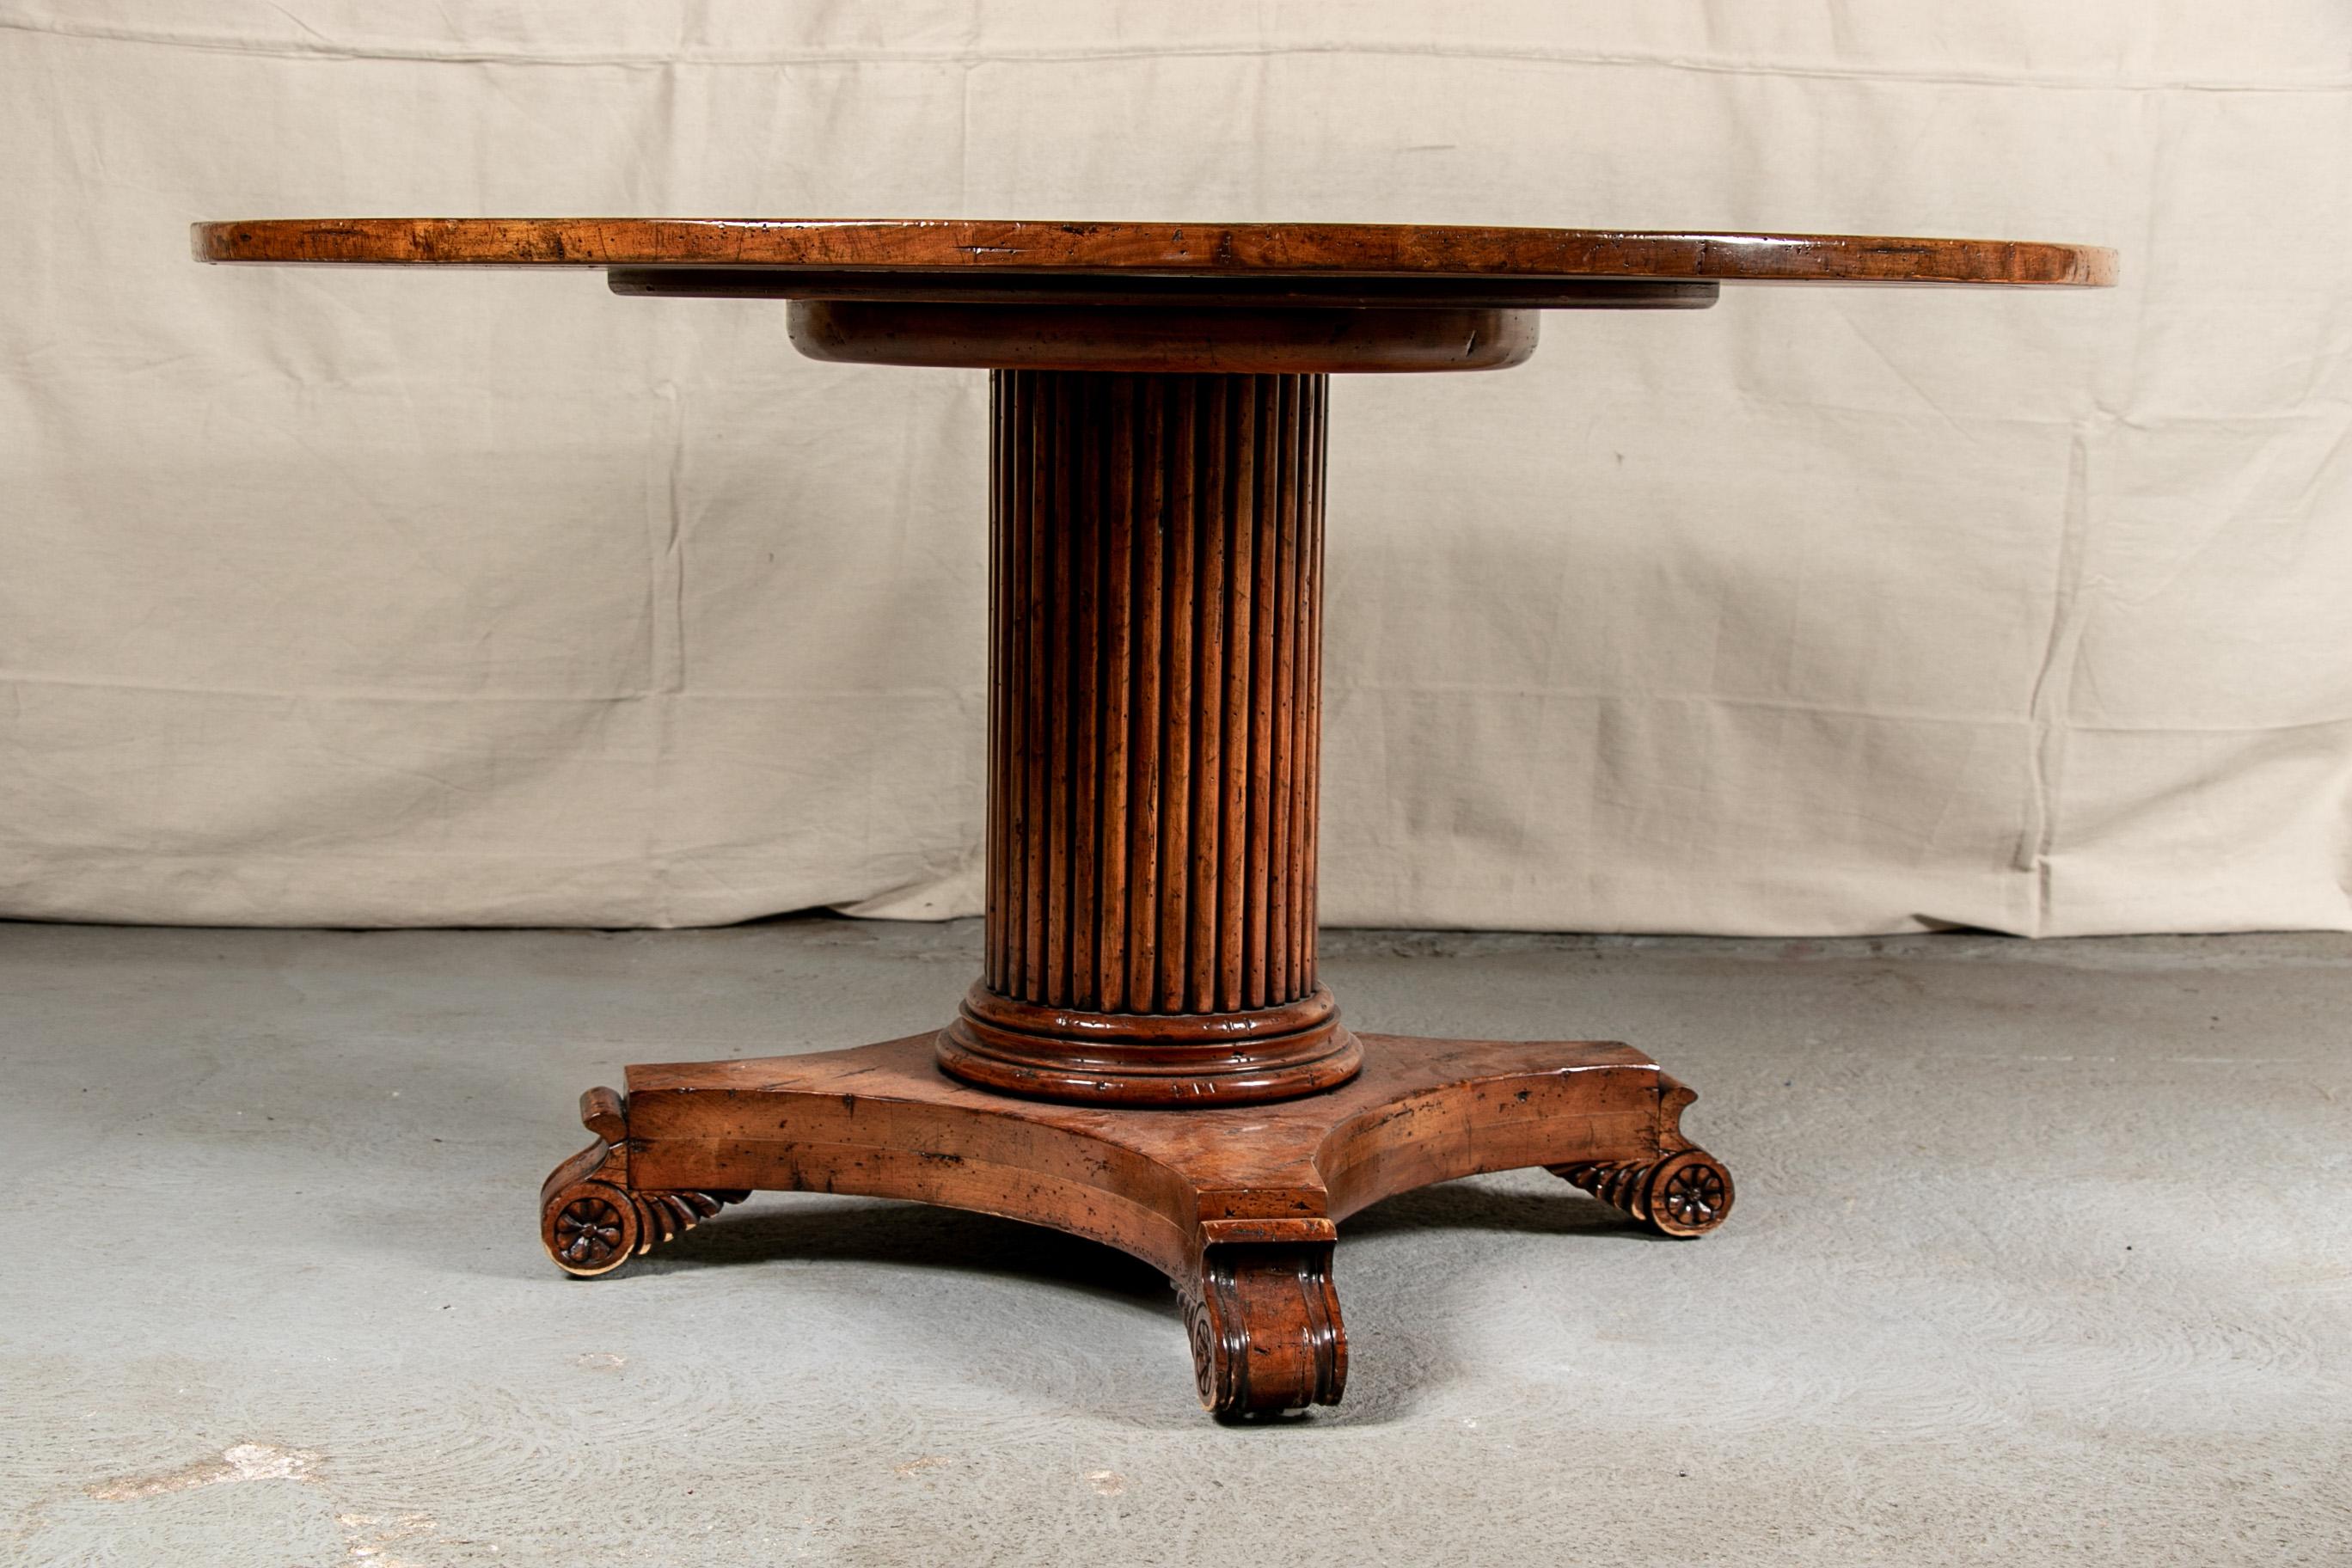 Custom Provincial circular dining table, possibly Grange or Guy Chaddock, pine table with banded plank top in a glazed finish, ribbed column support with for curved legs and carved scrolled feet with rosette ends. 

Condition: Expected signs of